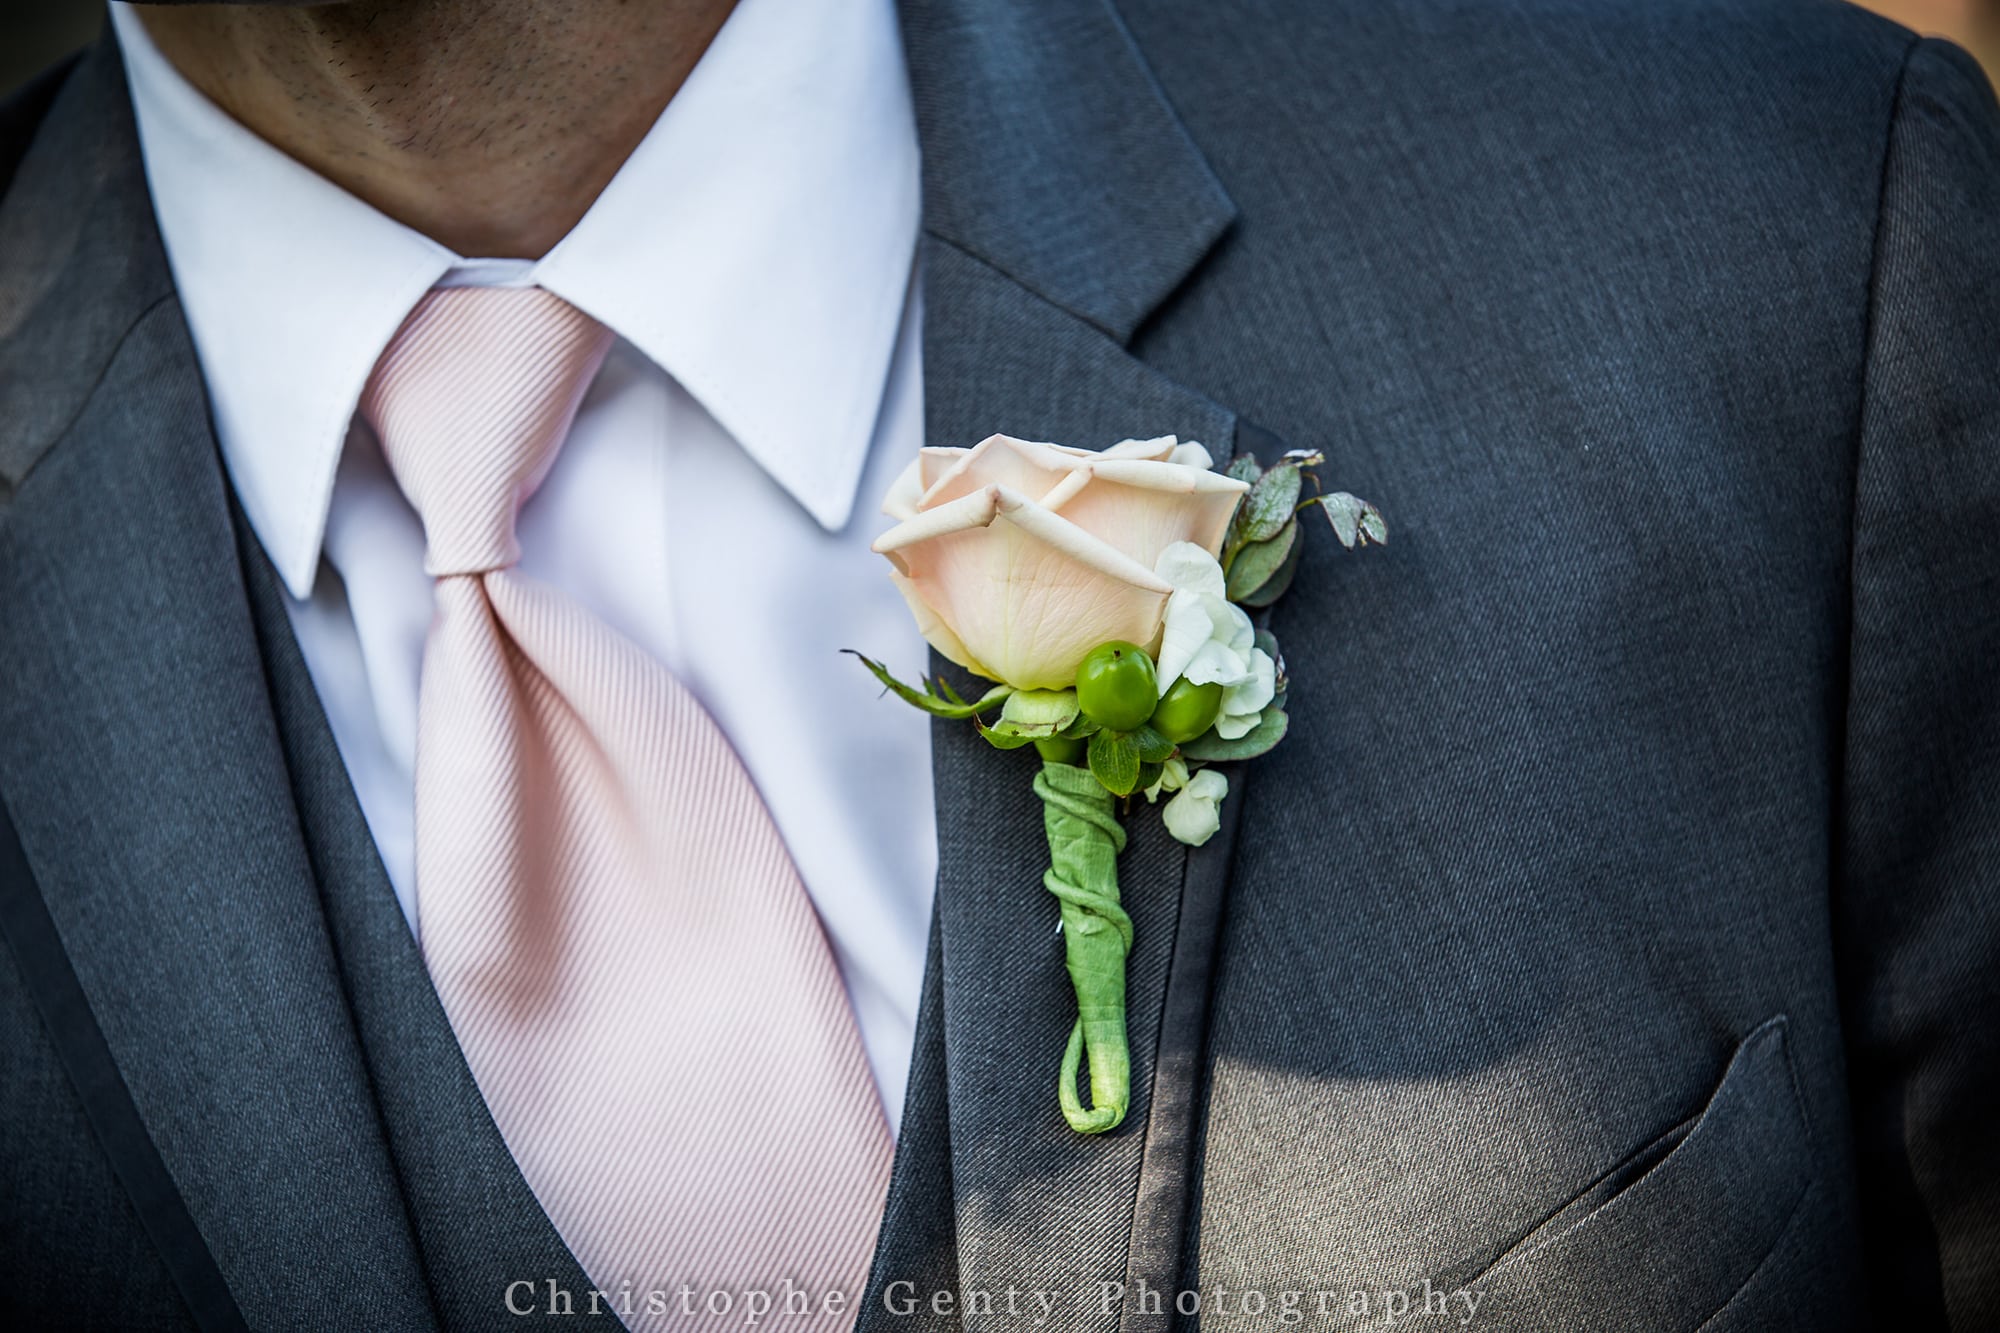 Christophe Genty Photography BlogWedding at the Vintners Golf Club in ...